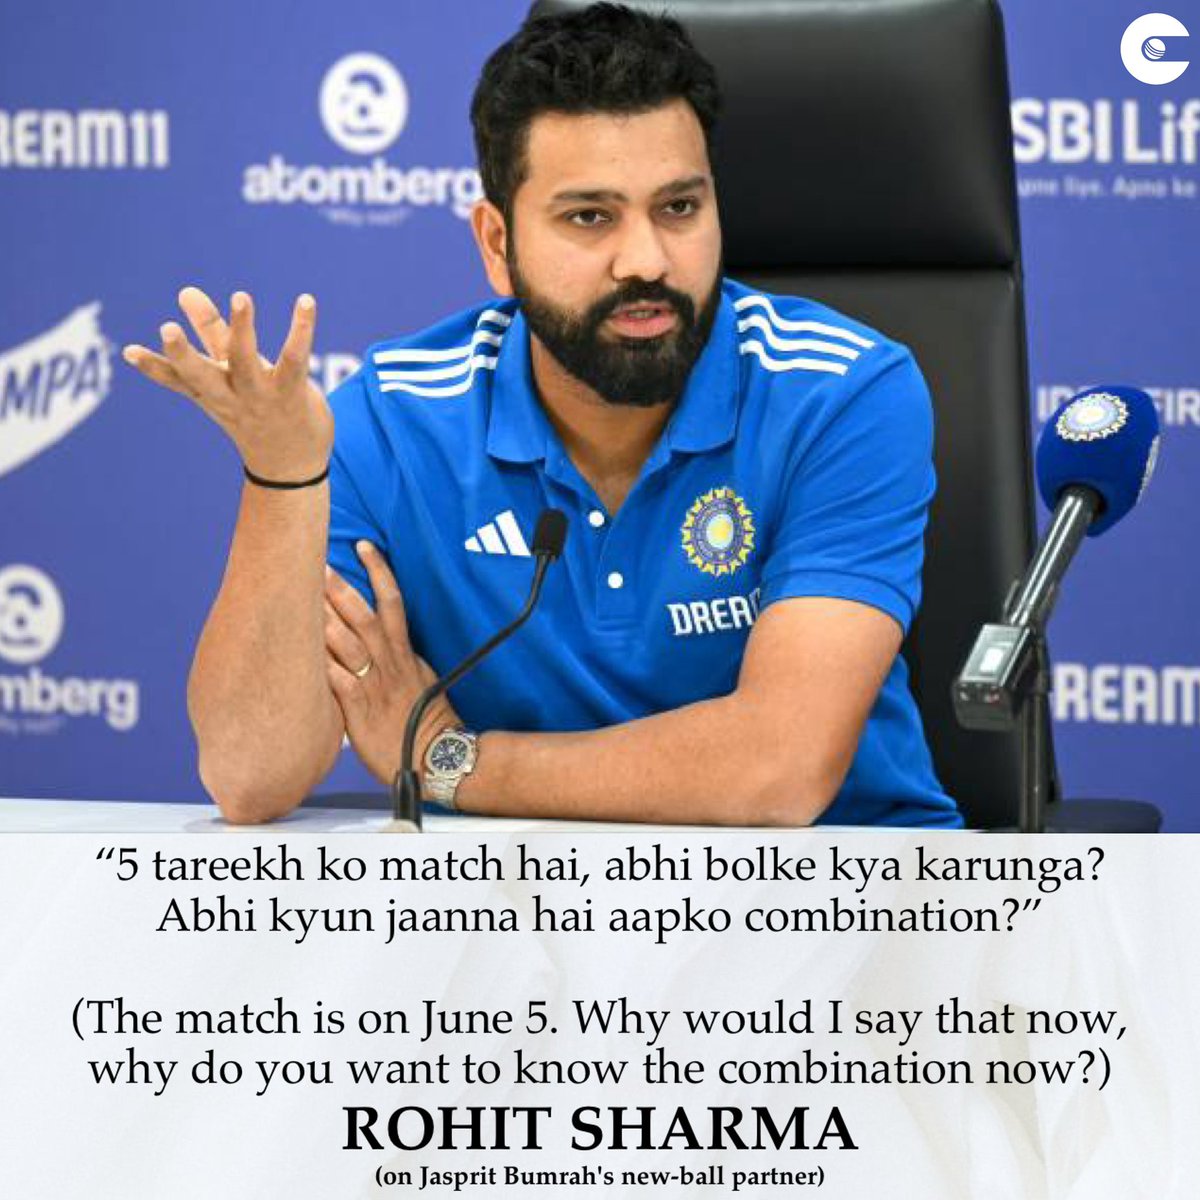 Typically, Rohit Sharma 😅

#TeamIndia #T20WorldCup